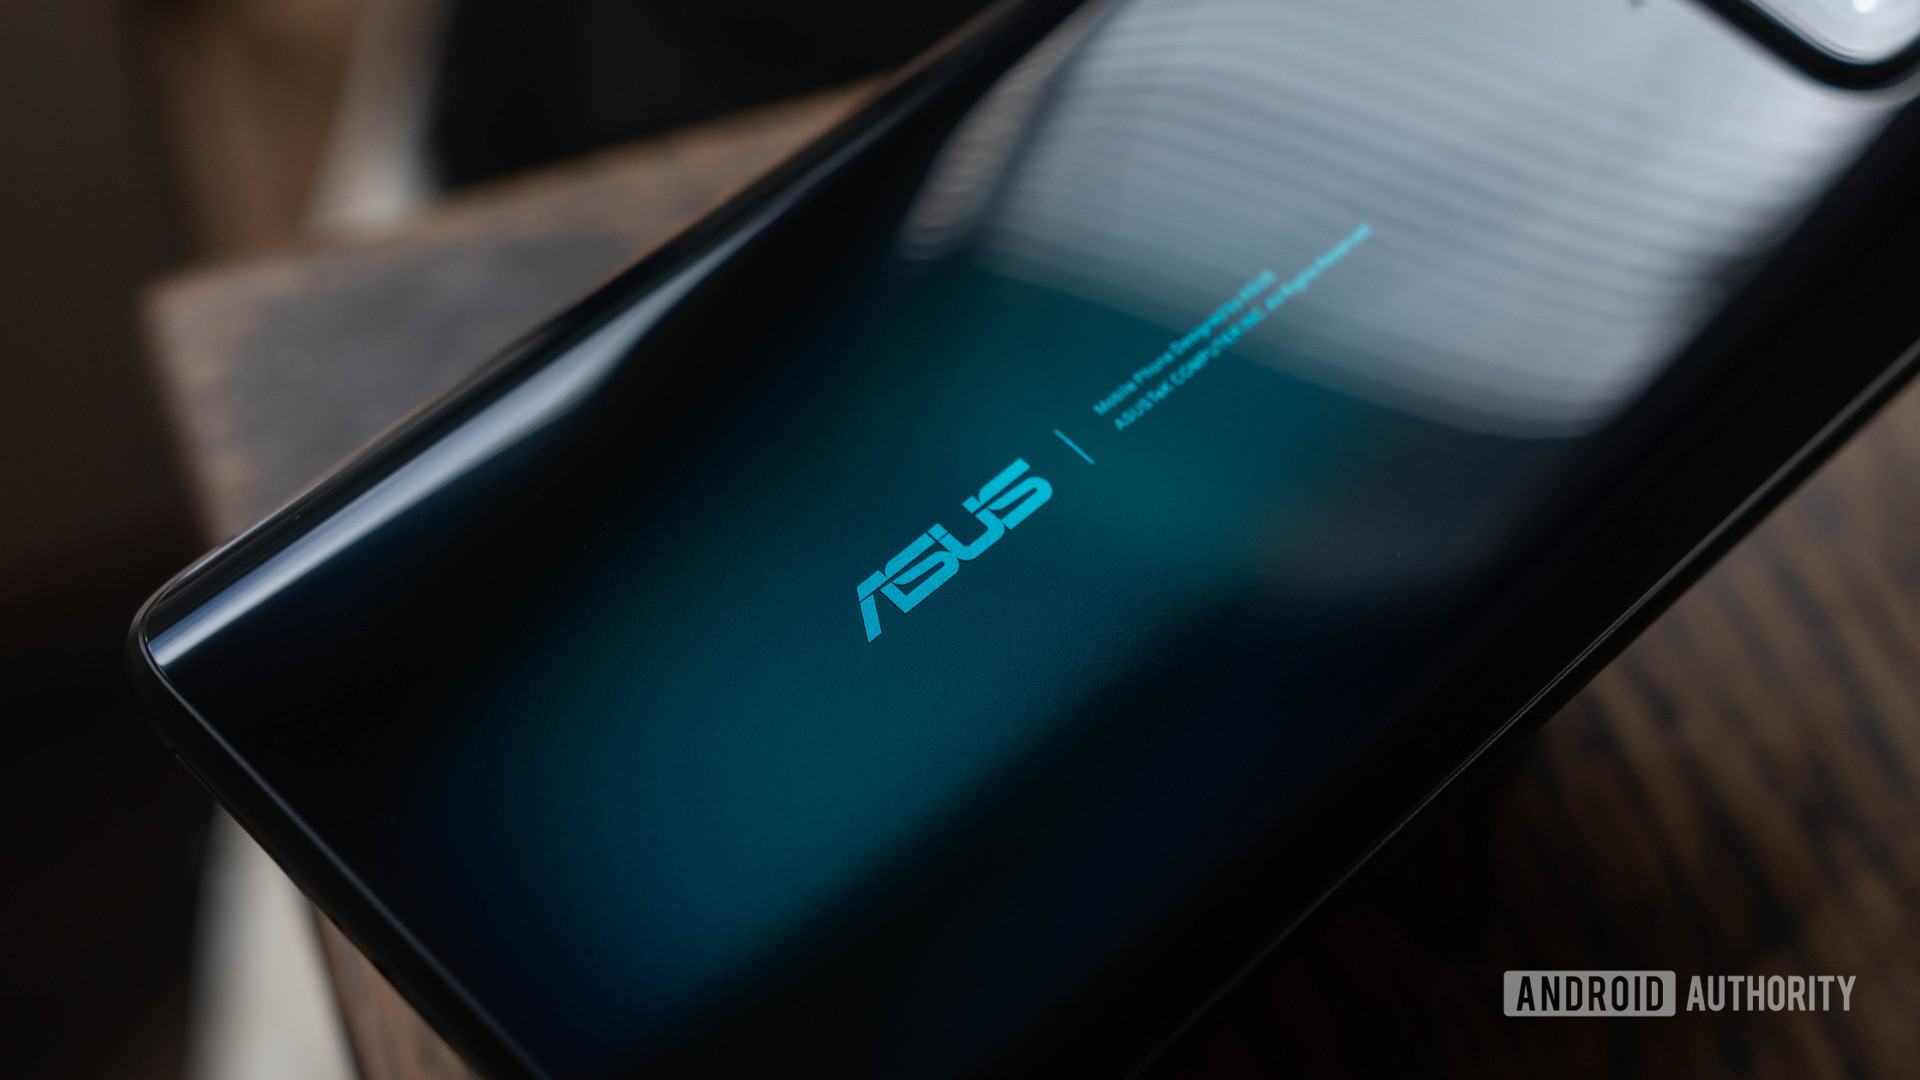 ASUS Zenfone 7 Pro focused on the asus logo